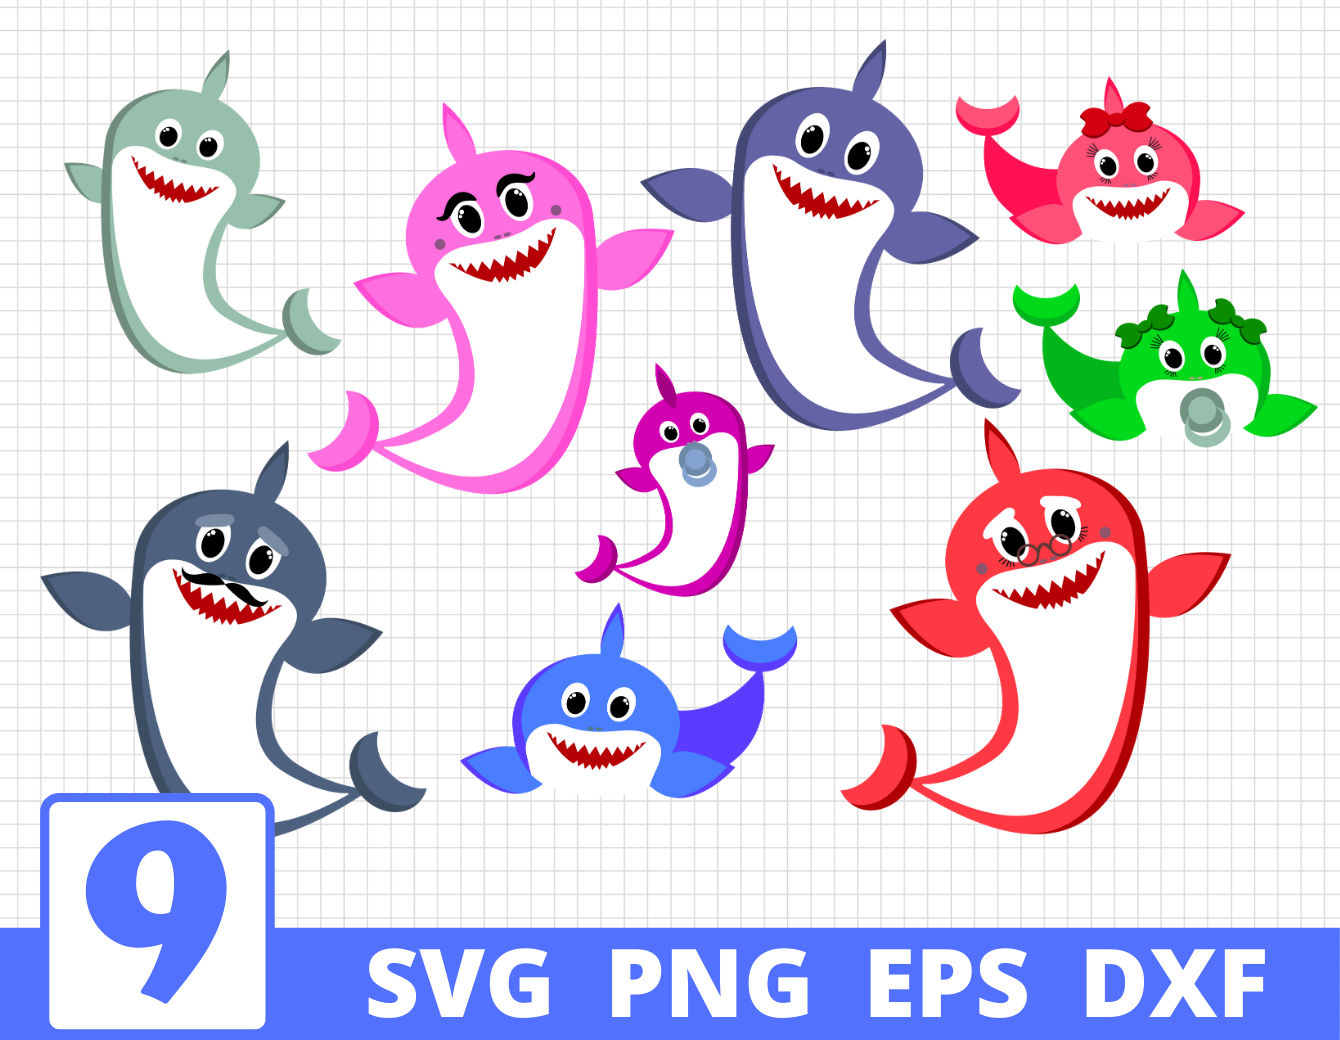 Download Commercial Use SVG Files Images